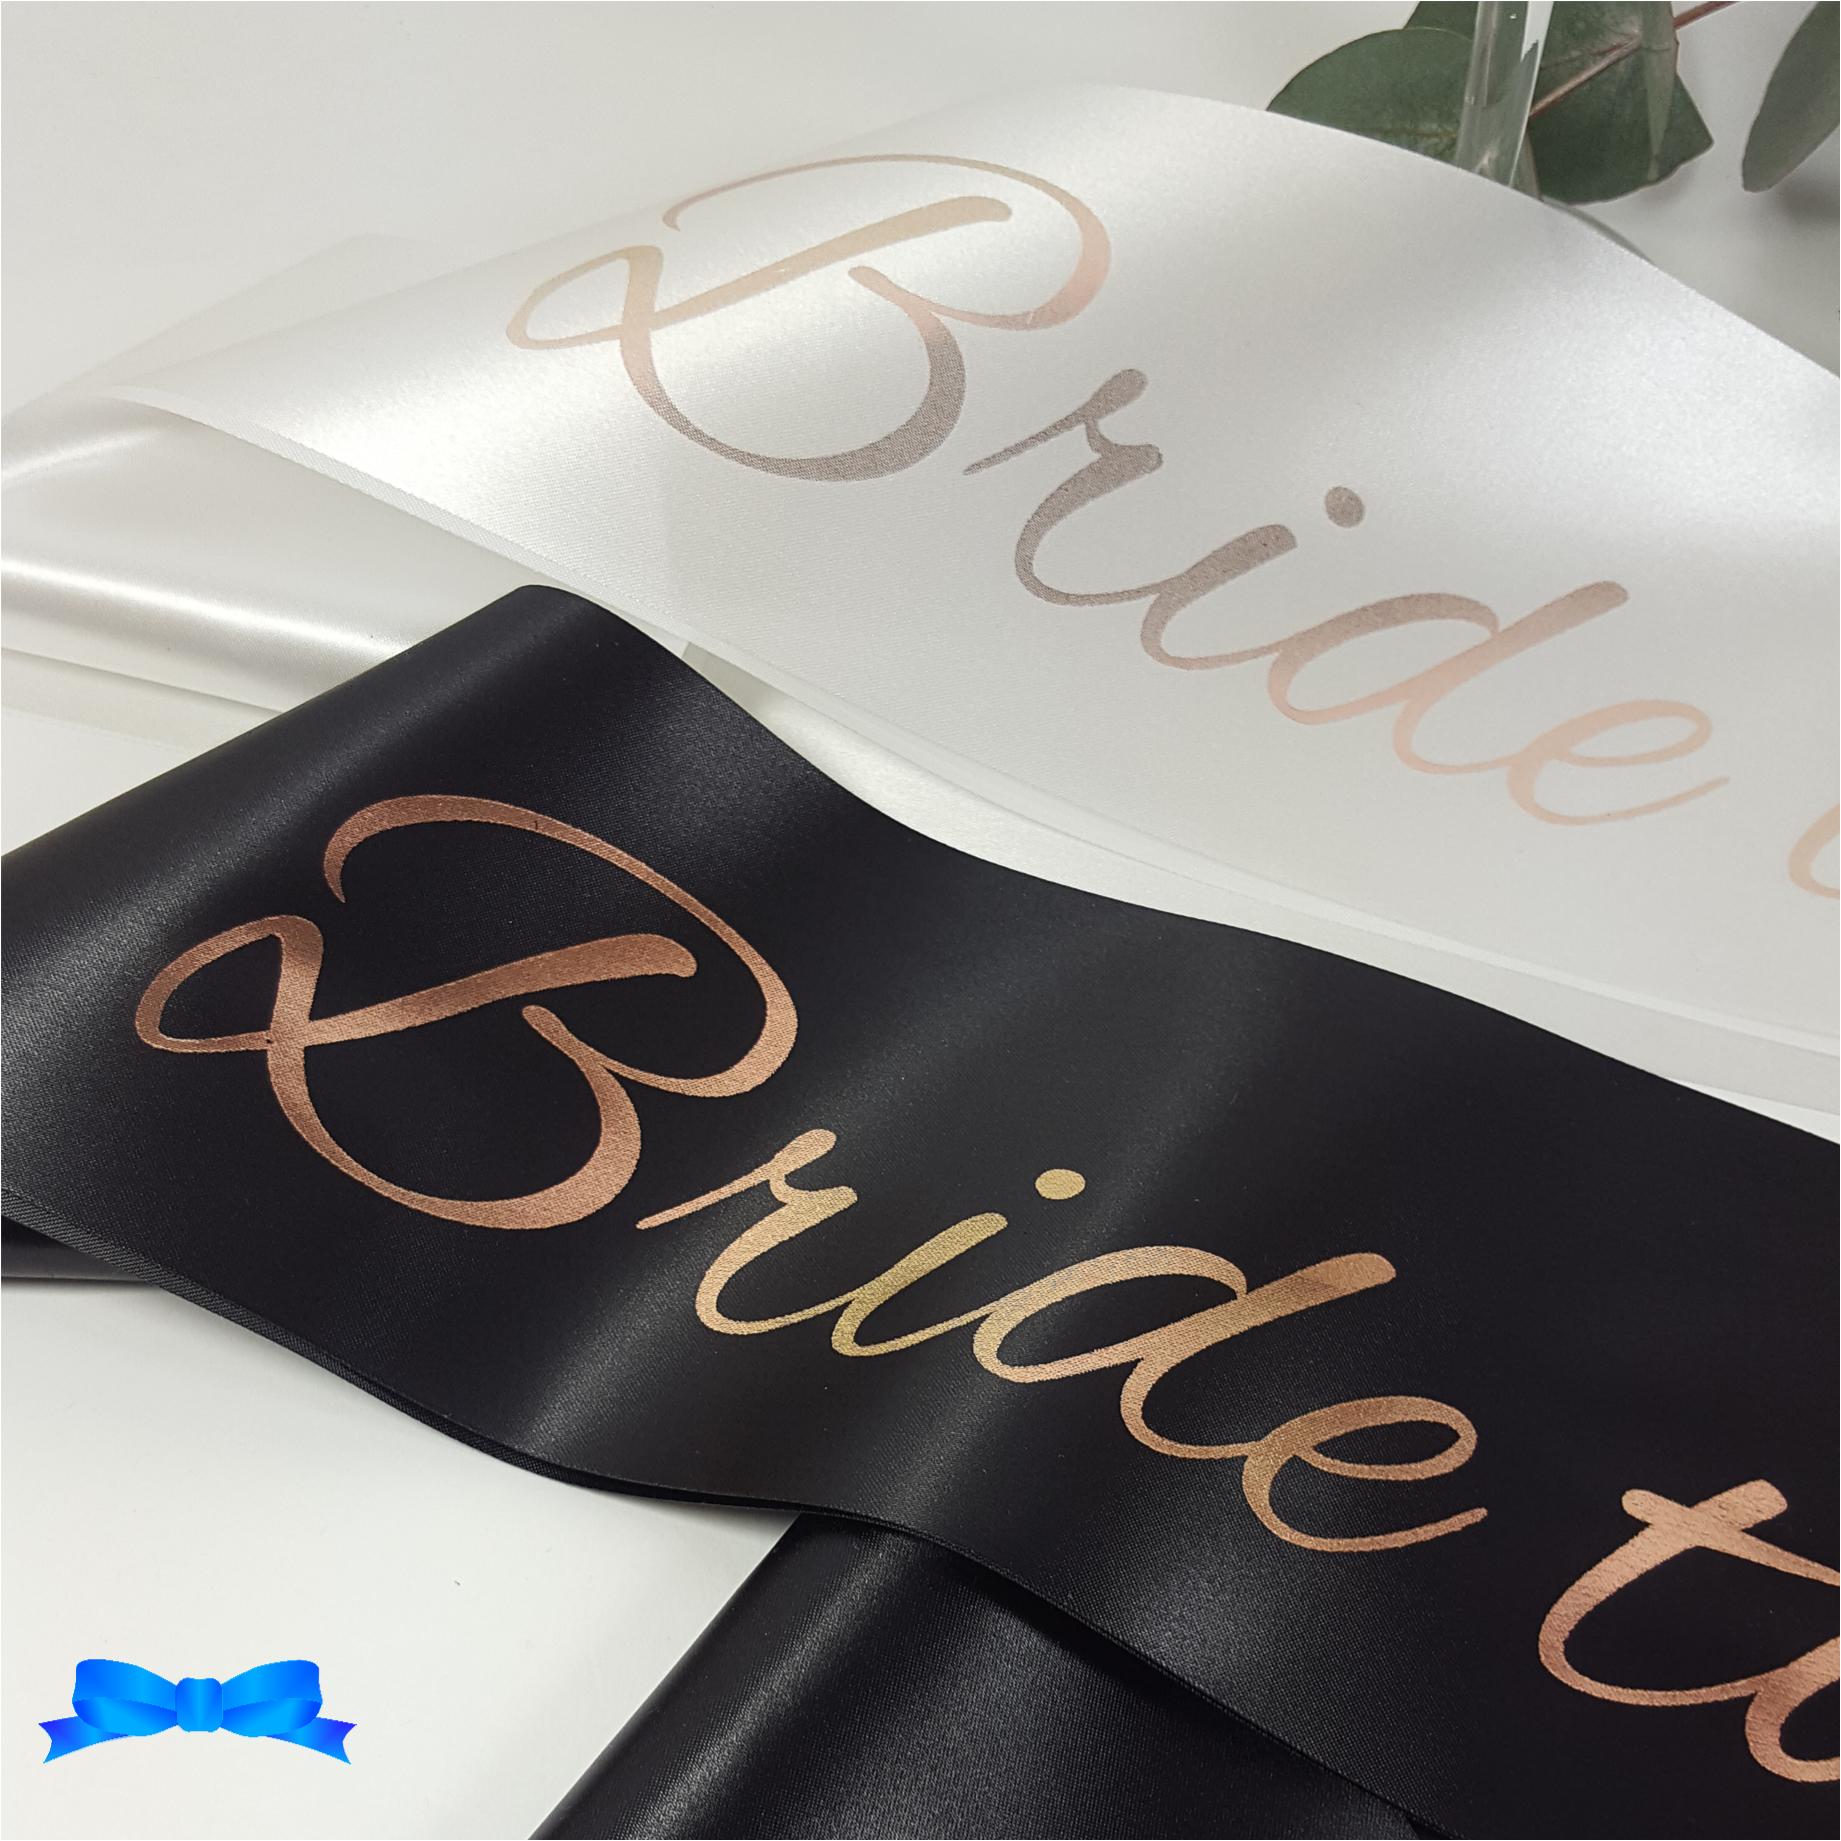 Black and white bride to be sash with rose gold print